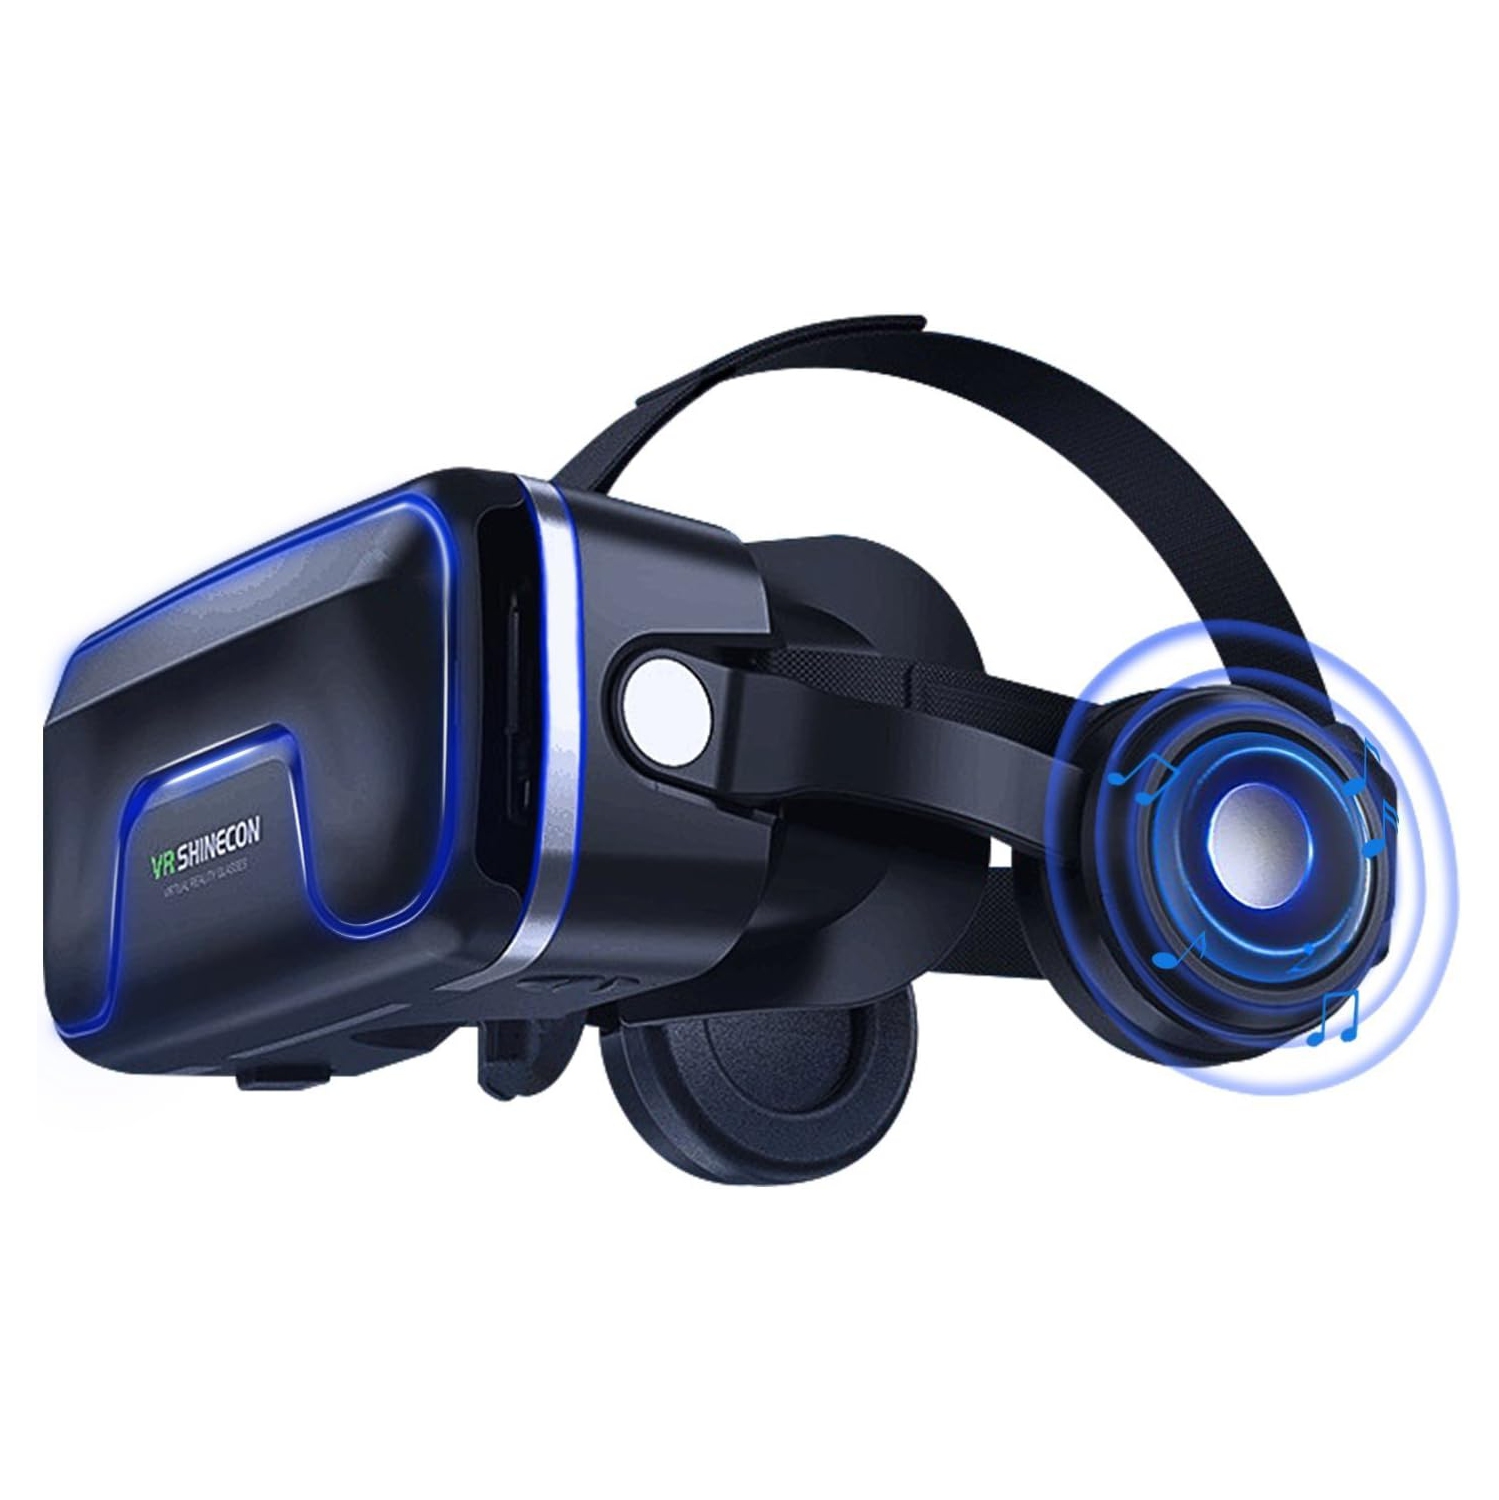 Virtual Reality Headset,3D VR Headset,VR Goggles - Compatible for iPh X, 7,Samsung Galaxy, Huawei, Google, Moto & All